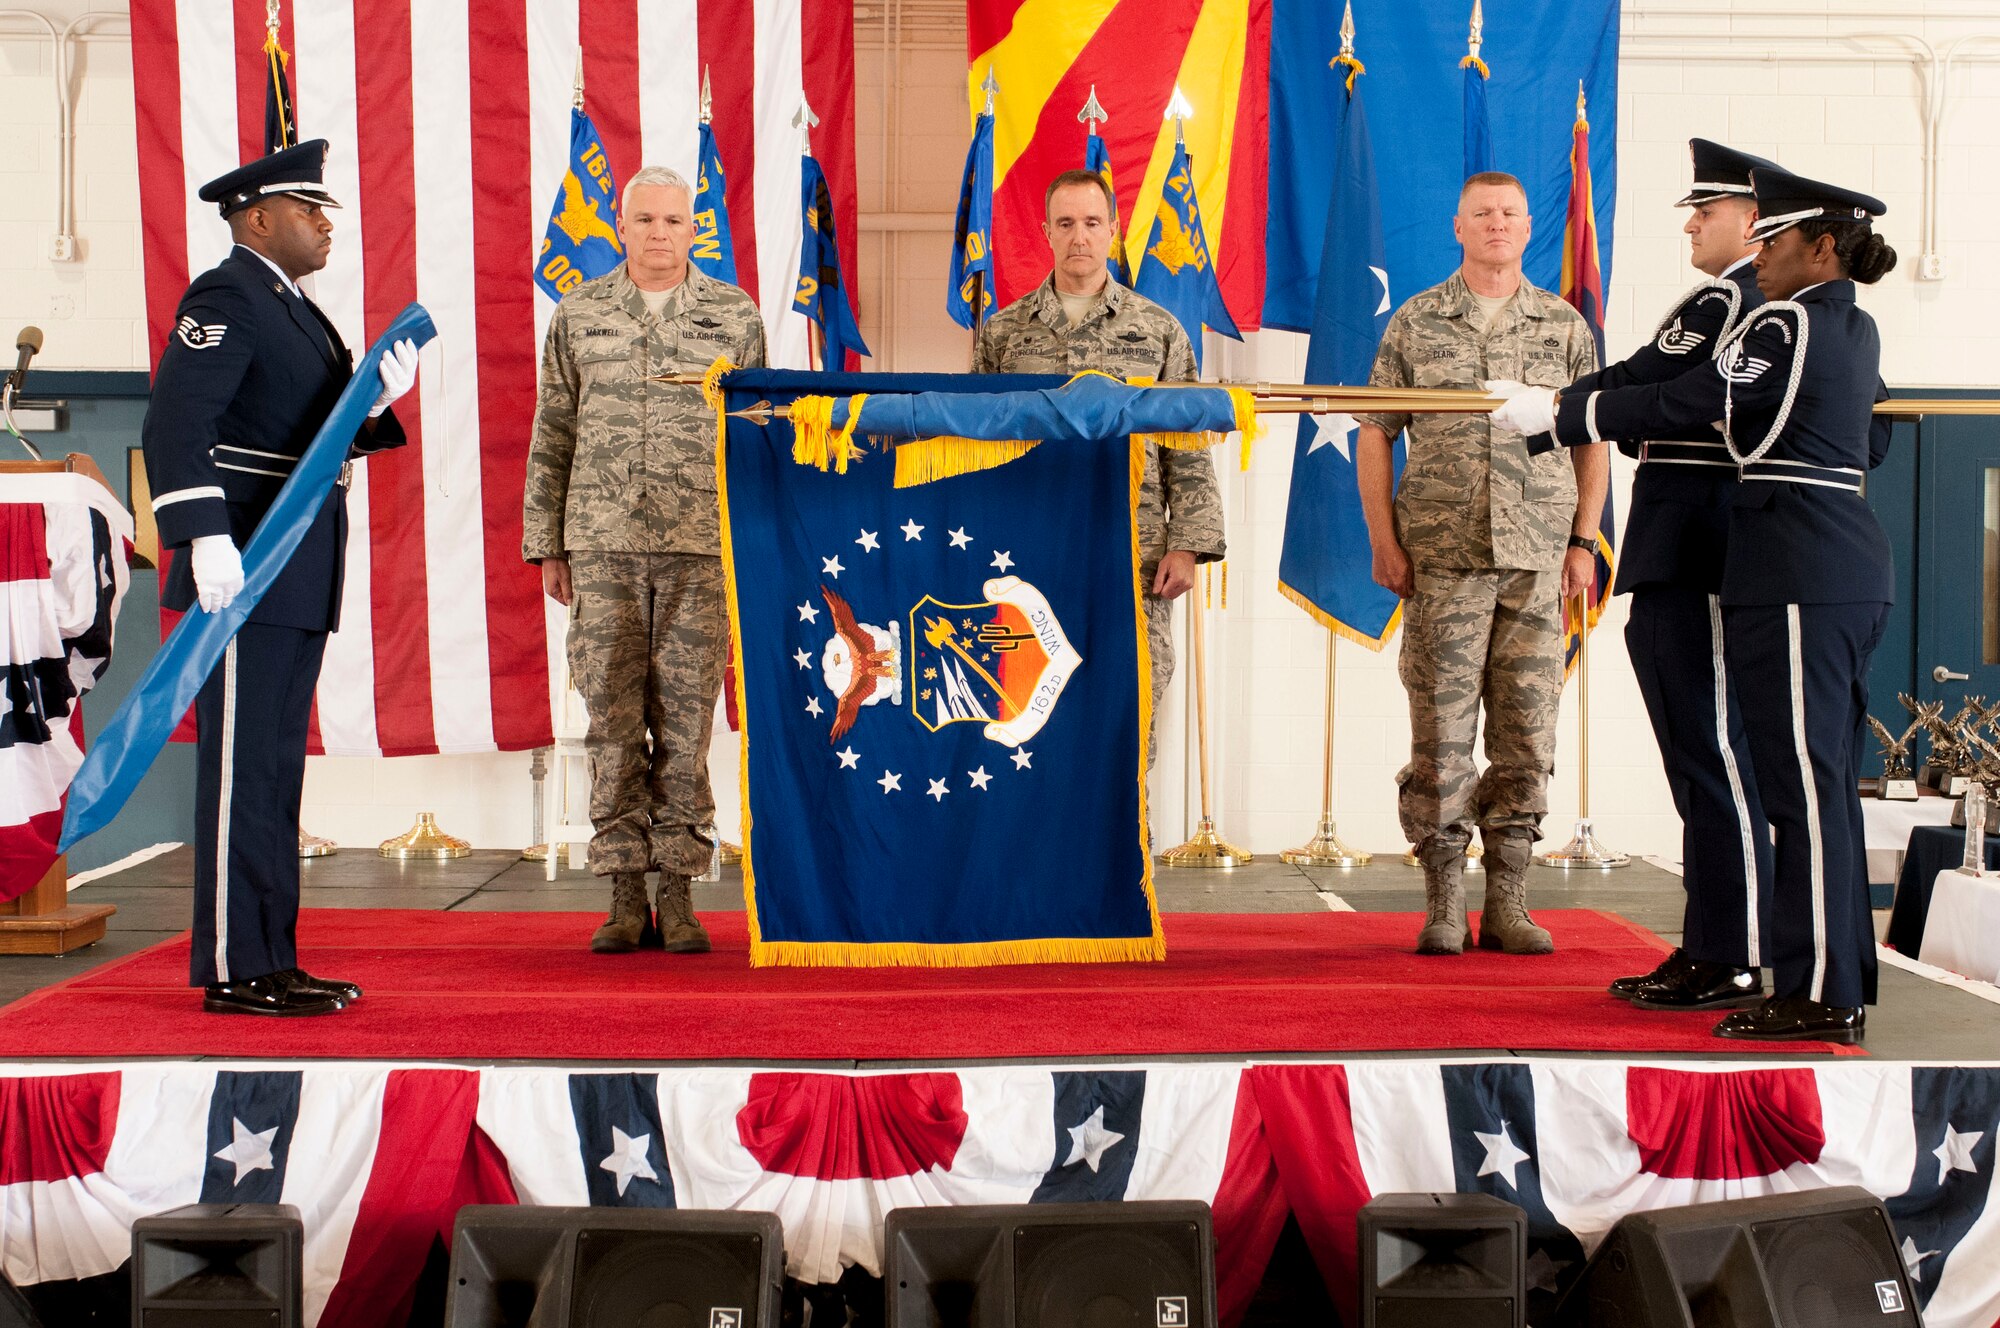 Out with the old, in with the new…a new wing name that is. The 162nd Fighter Wing is now the 162nd Wing, marking the official inclusion of the 214th Reconnaissance Group. Brig. Gen. Edward Maxwell, Commander of the Arizona Air National Guard, Col. Phil Purcell, the 162nd Wing Commander and Command Chief Master Sgt. Shane G. Clark, Chief Enlisted Advisor, witness the unfurling of the new 162nd Wing flag by Air National Guard Honor Guardsmen April 5 here at the Tucson International Airport. (U.S. Air National Guard photo by Tech. Sgt. Hollie Hansen)